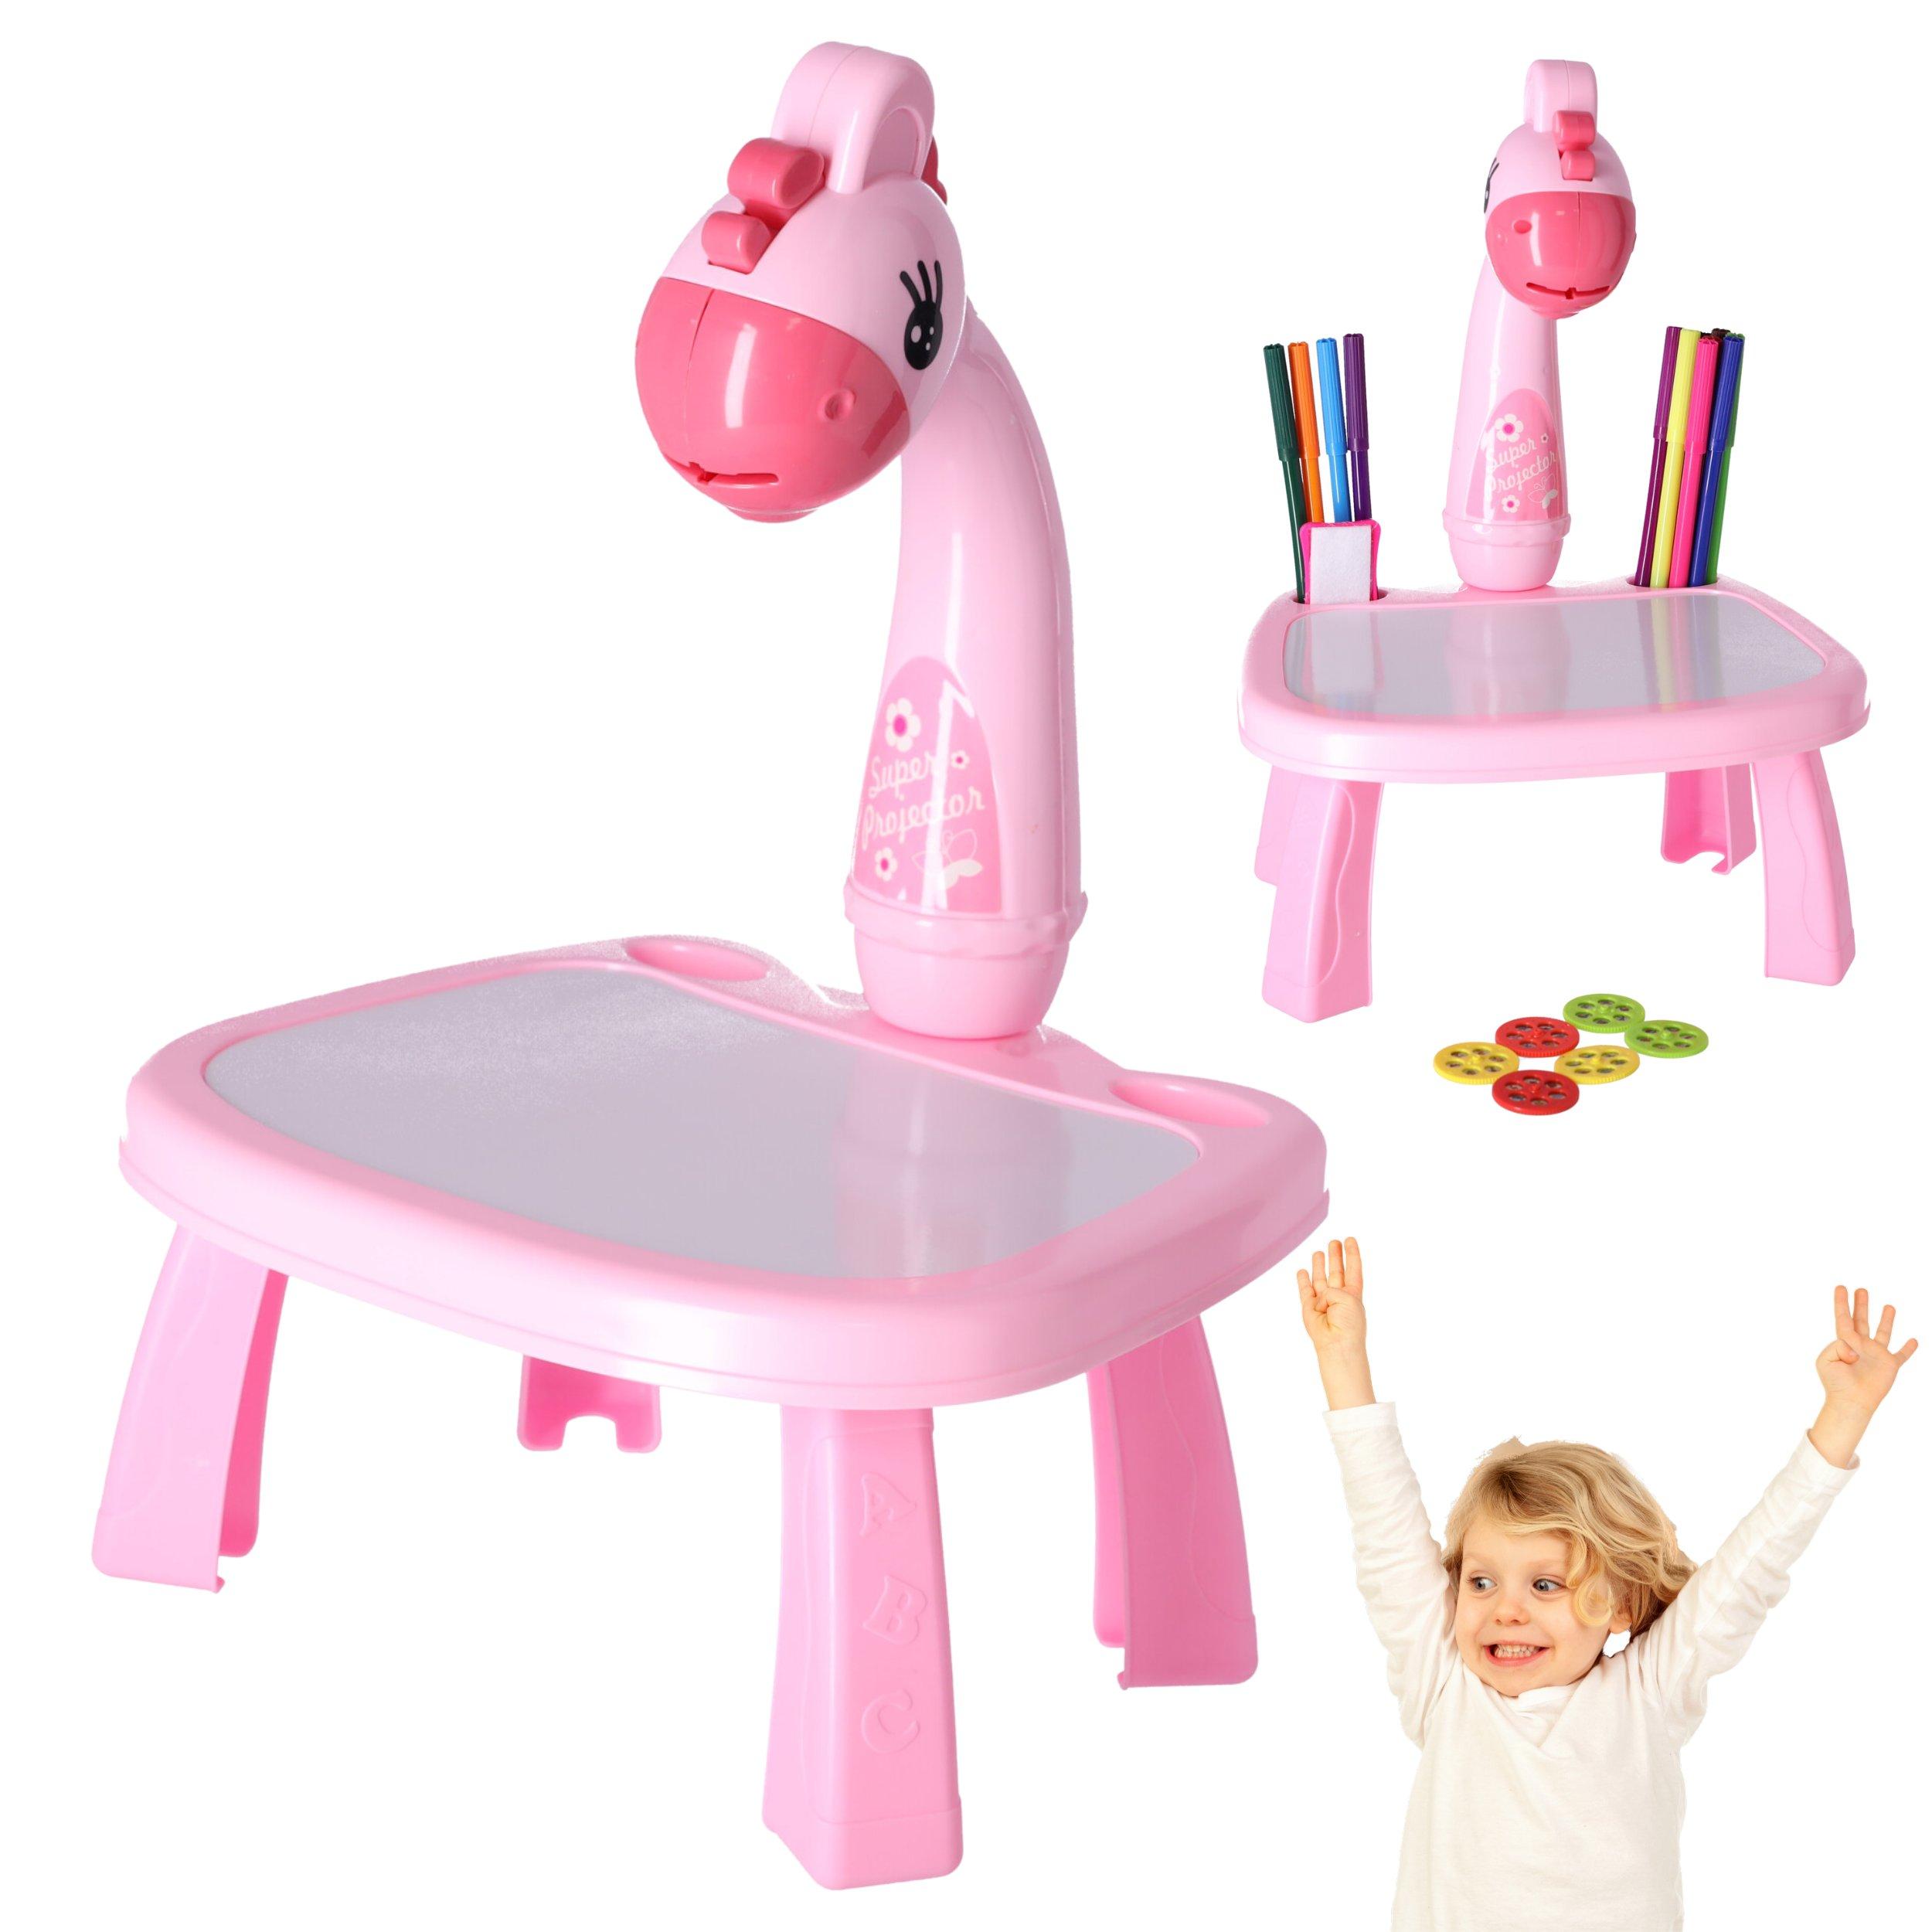 Multifunctional projector / projector for learning to draw - pink giraffe